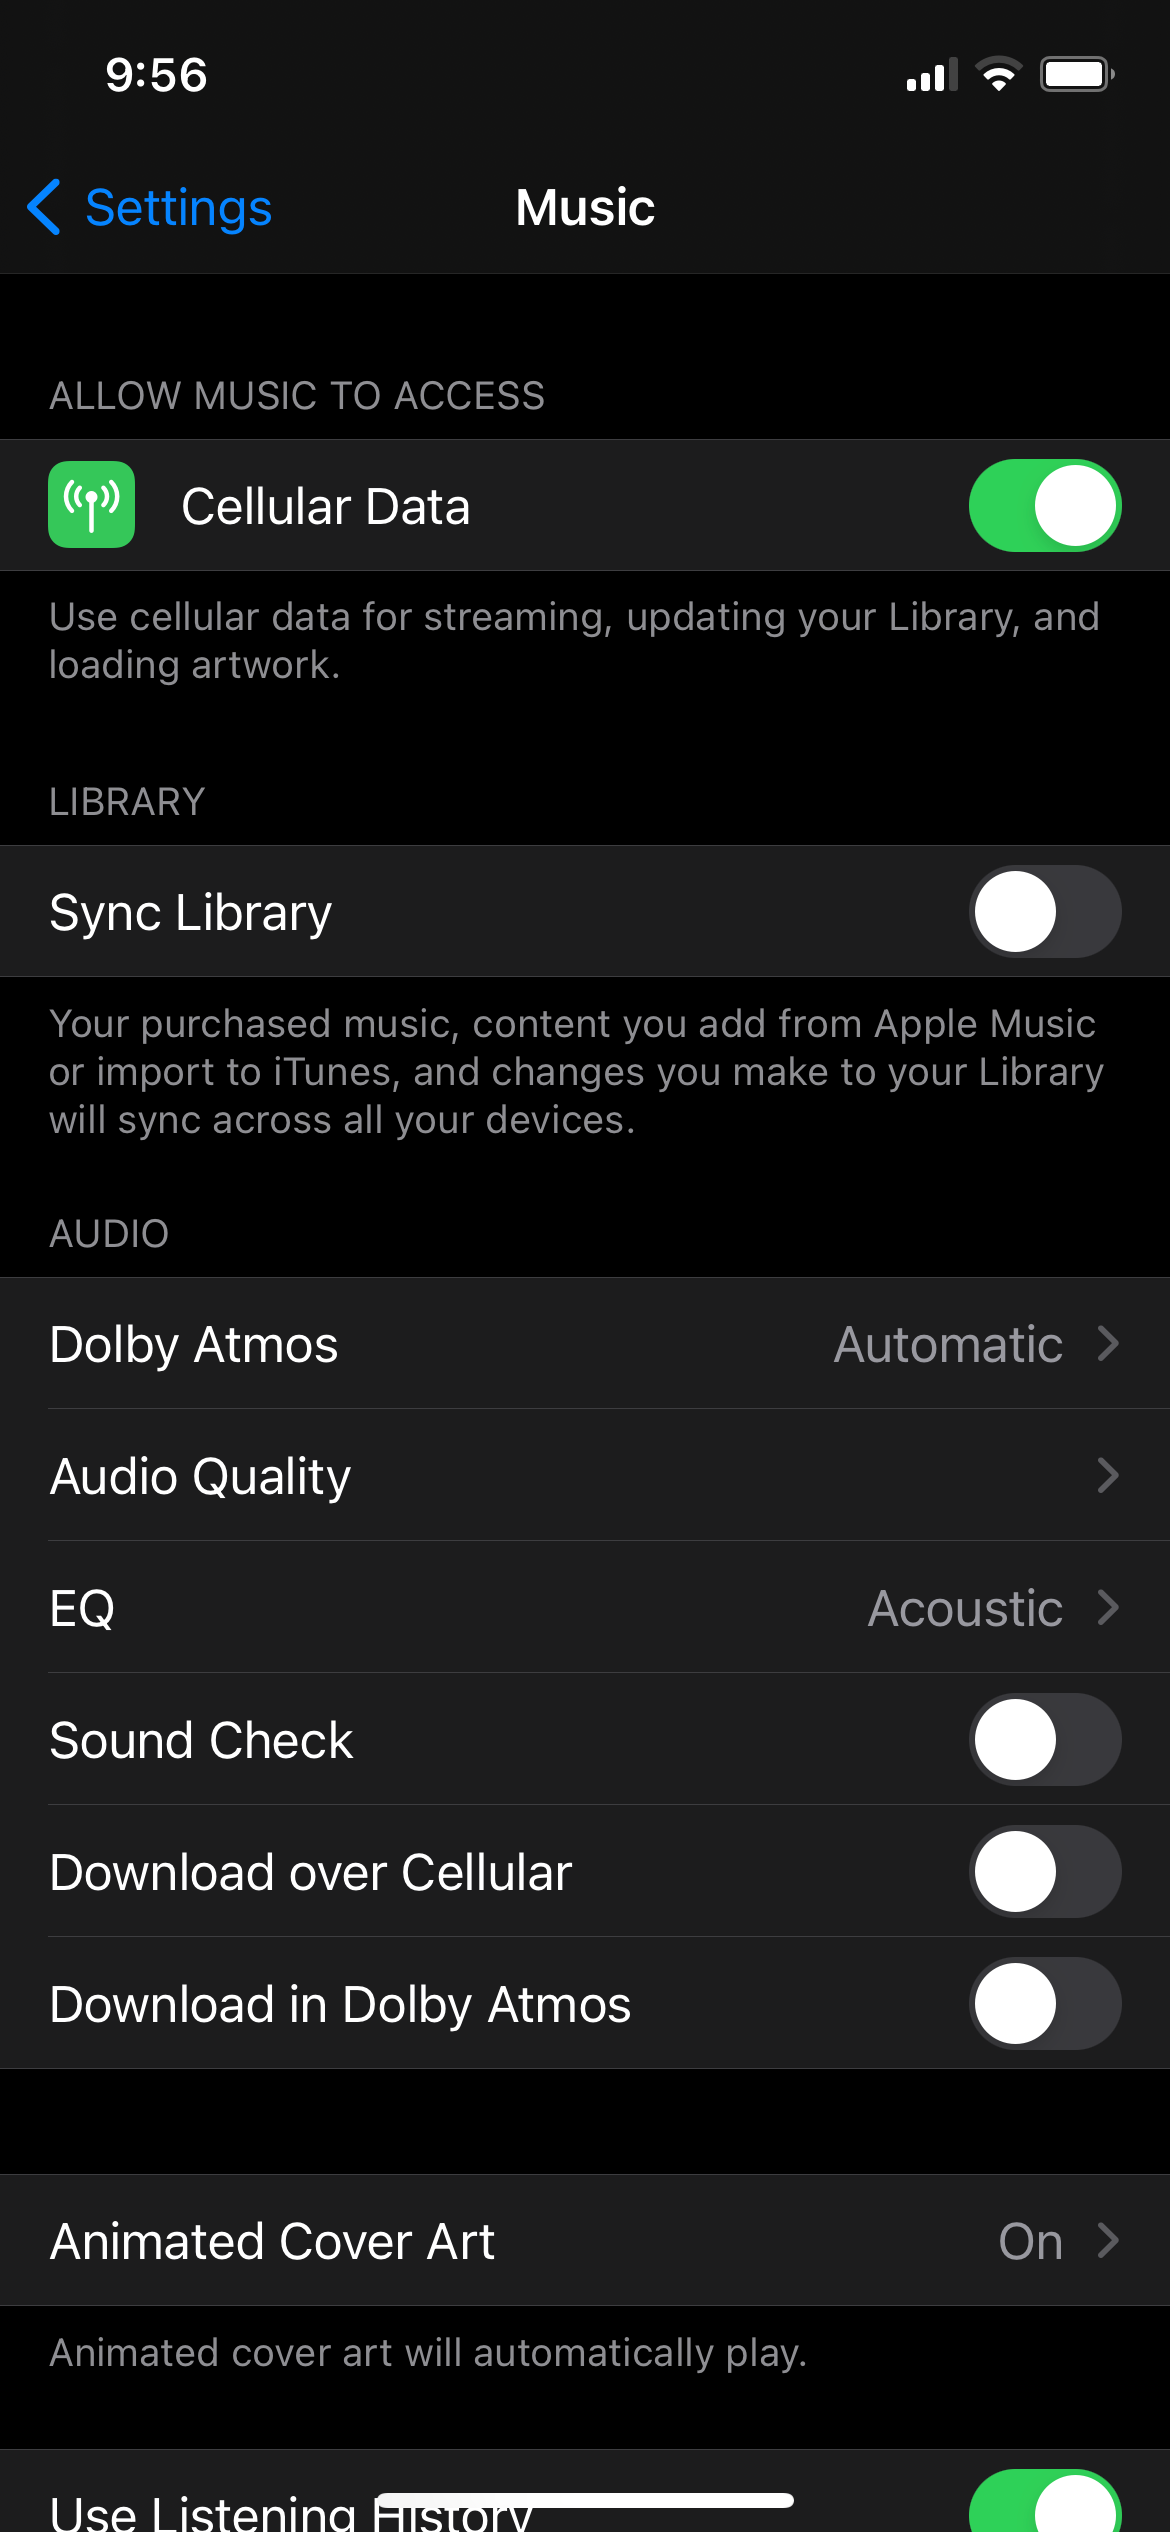 Music-Dolby Atmos Option